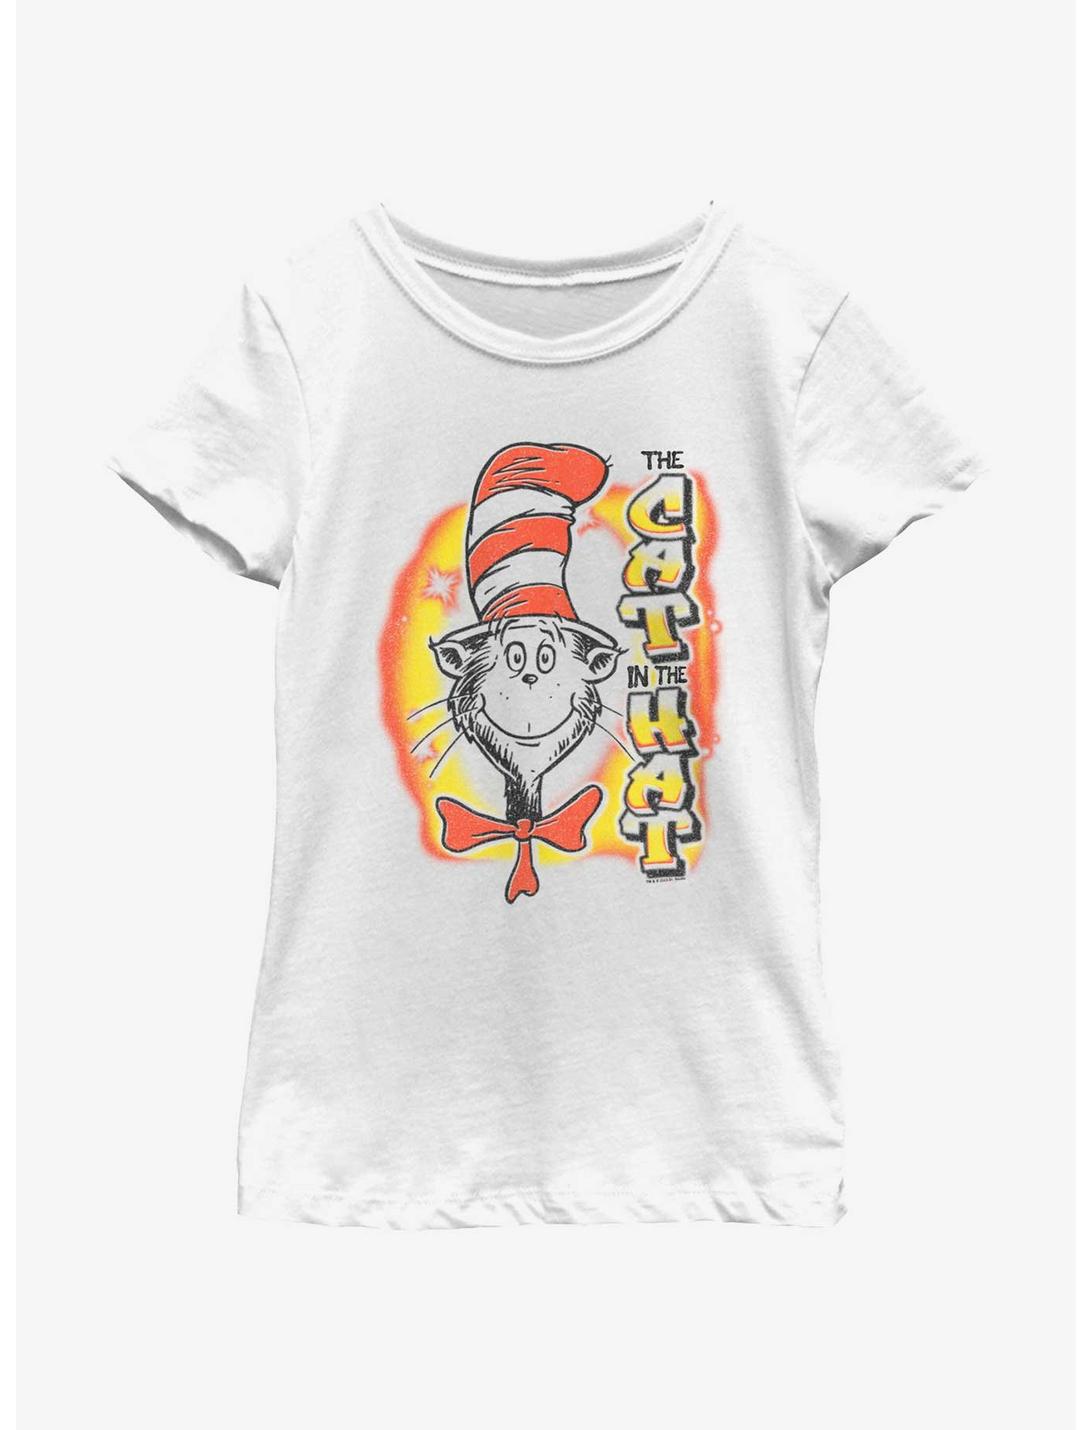 Dr. Seuss's Cat In The Hat Spray Graffiti Youth Girls T-Shirt, WHITE, hi-res